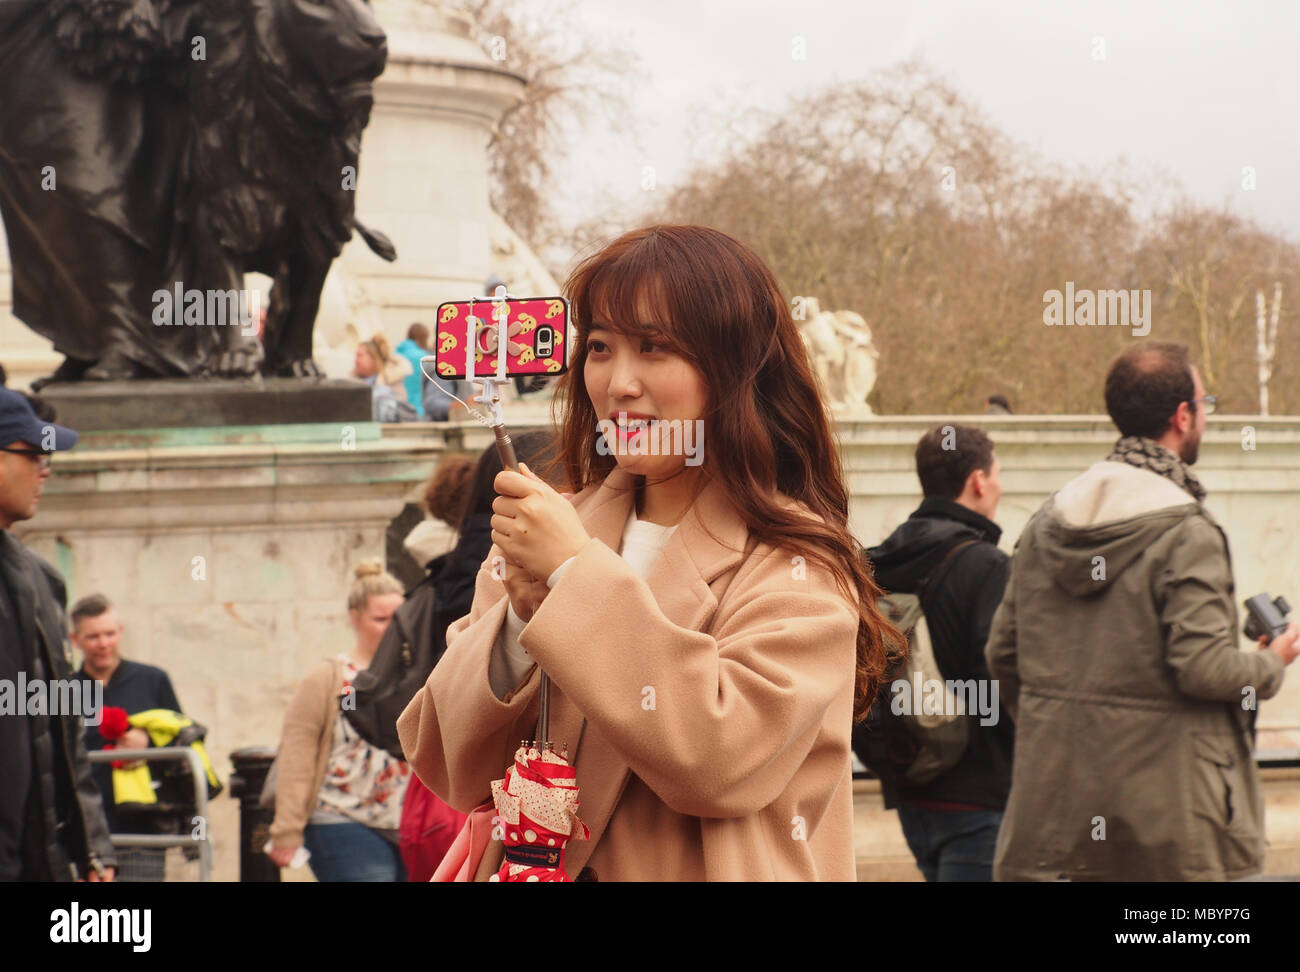 A young woman taking a selfie on her smartphone in the area in front of Buckingham Palace, London Stock Photo